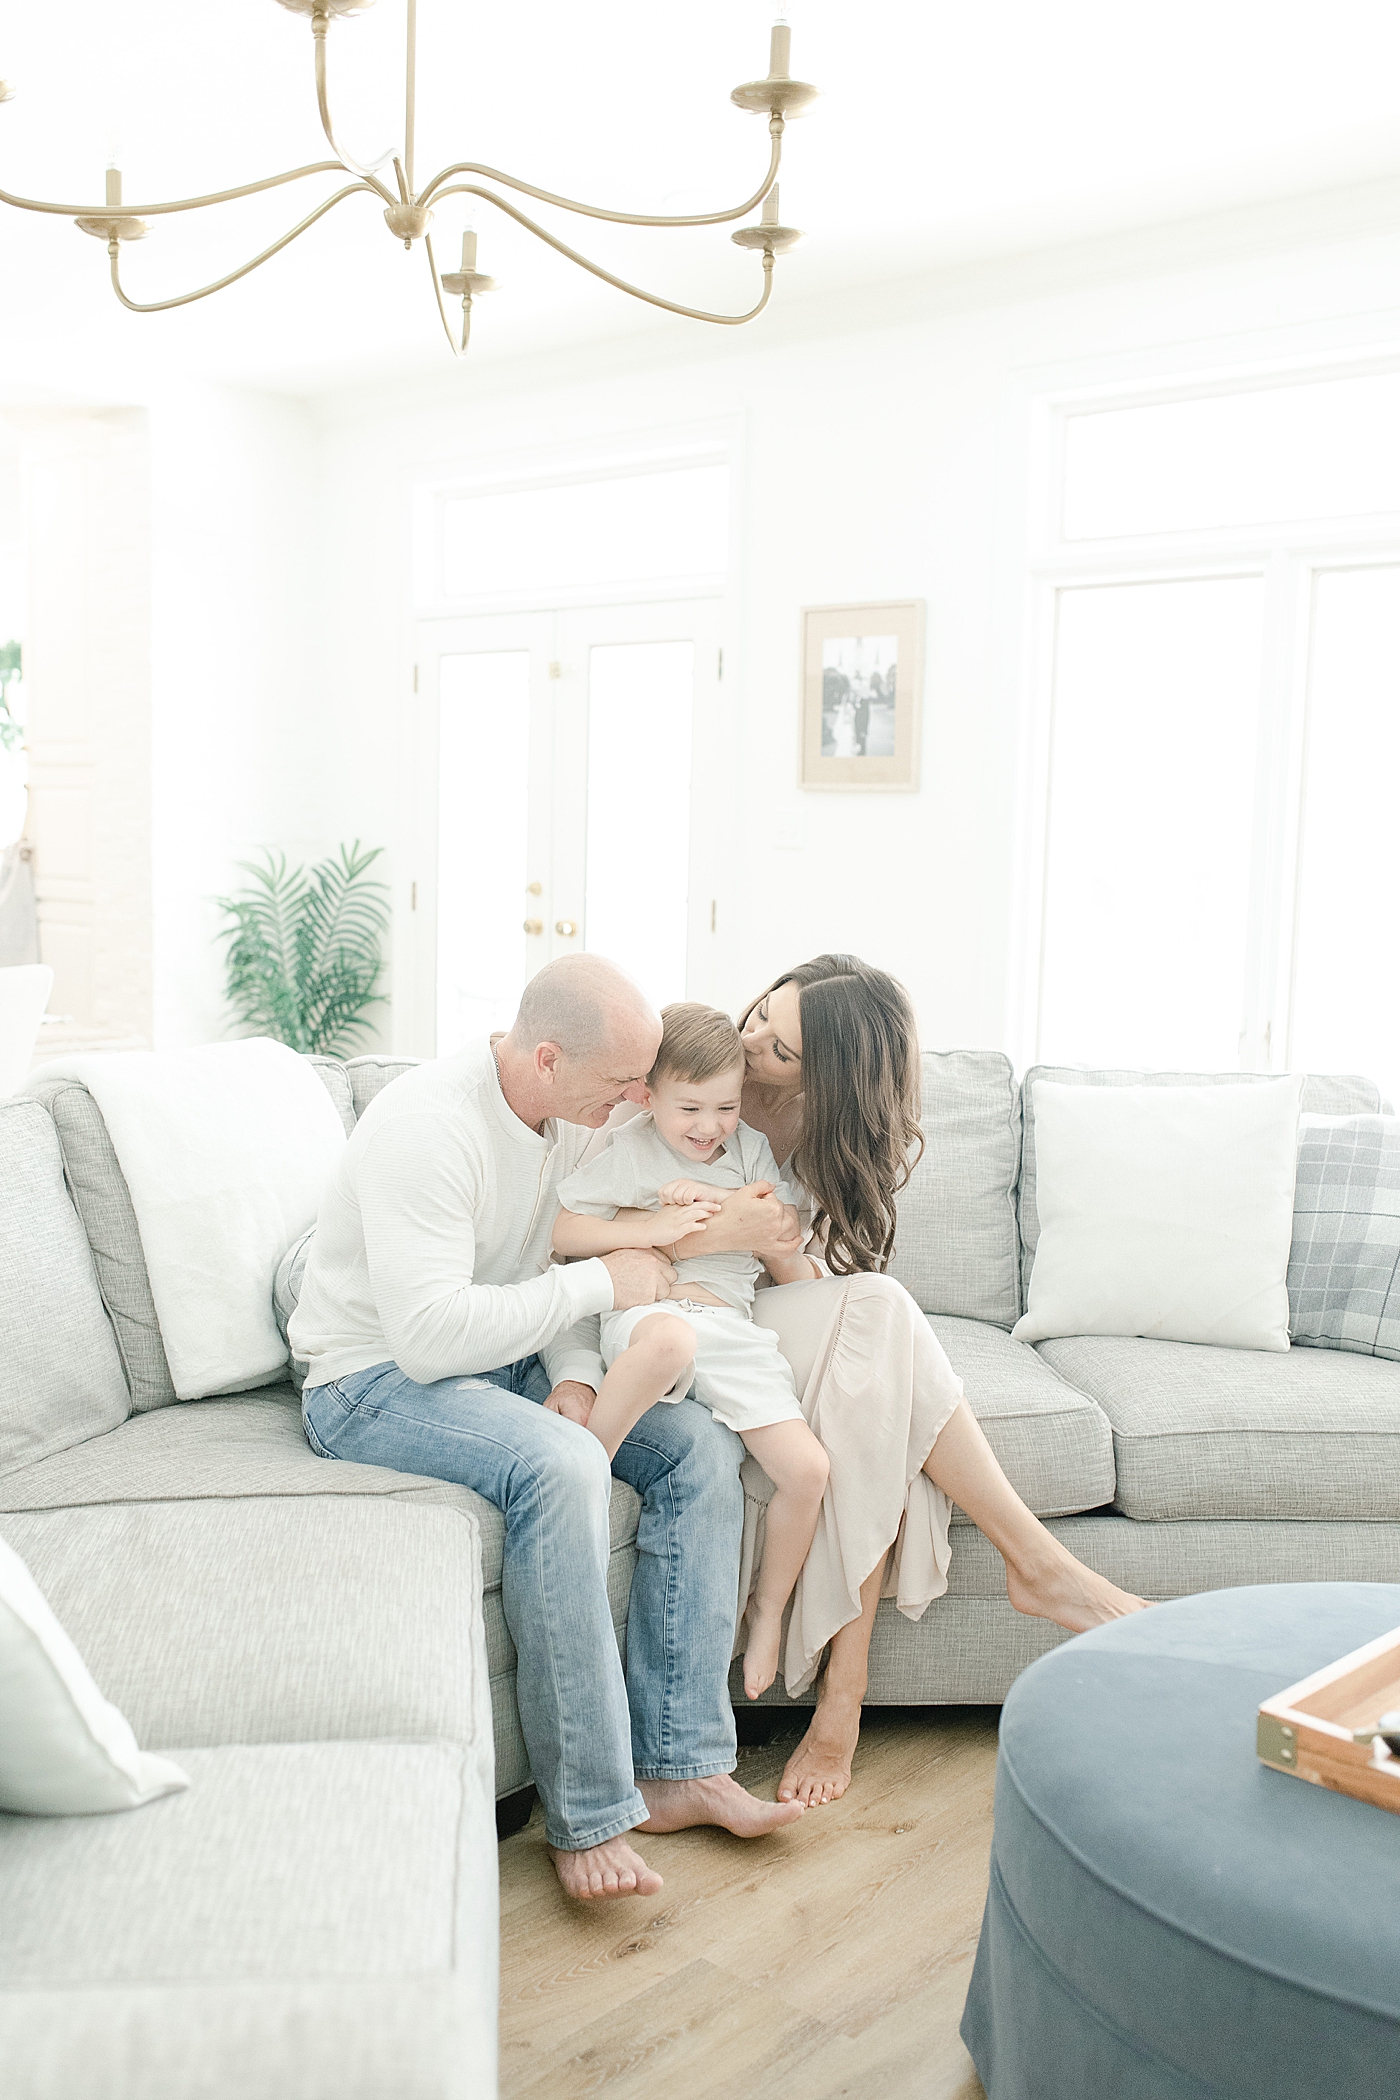 Mom and Dad kissing son while sitting on couch in living room. Photo by Little Sunshine Photography